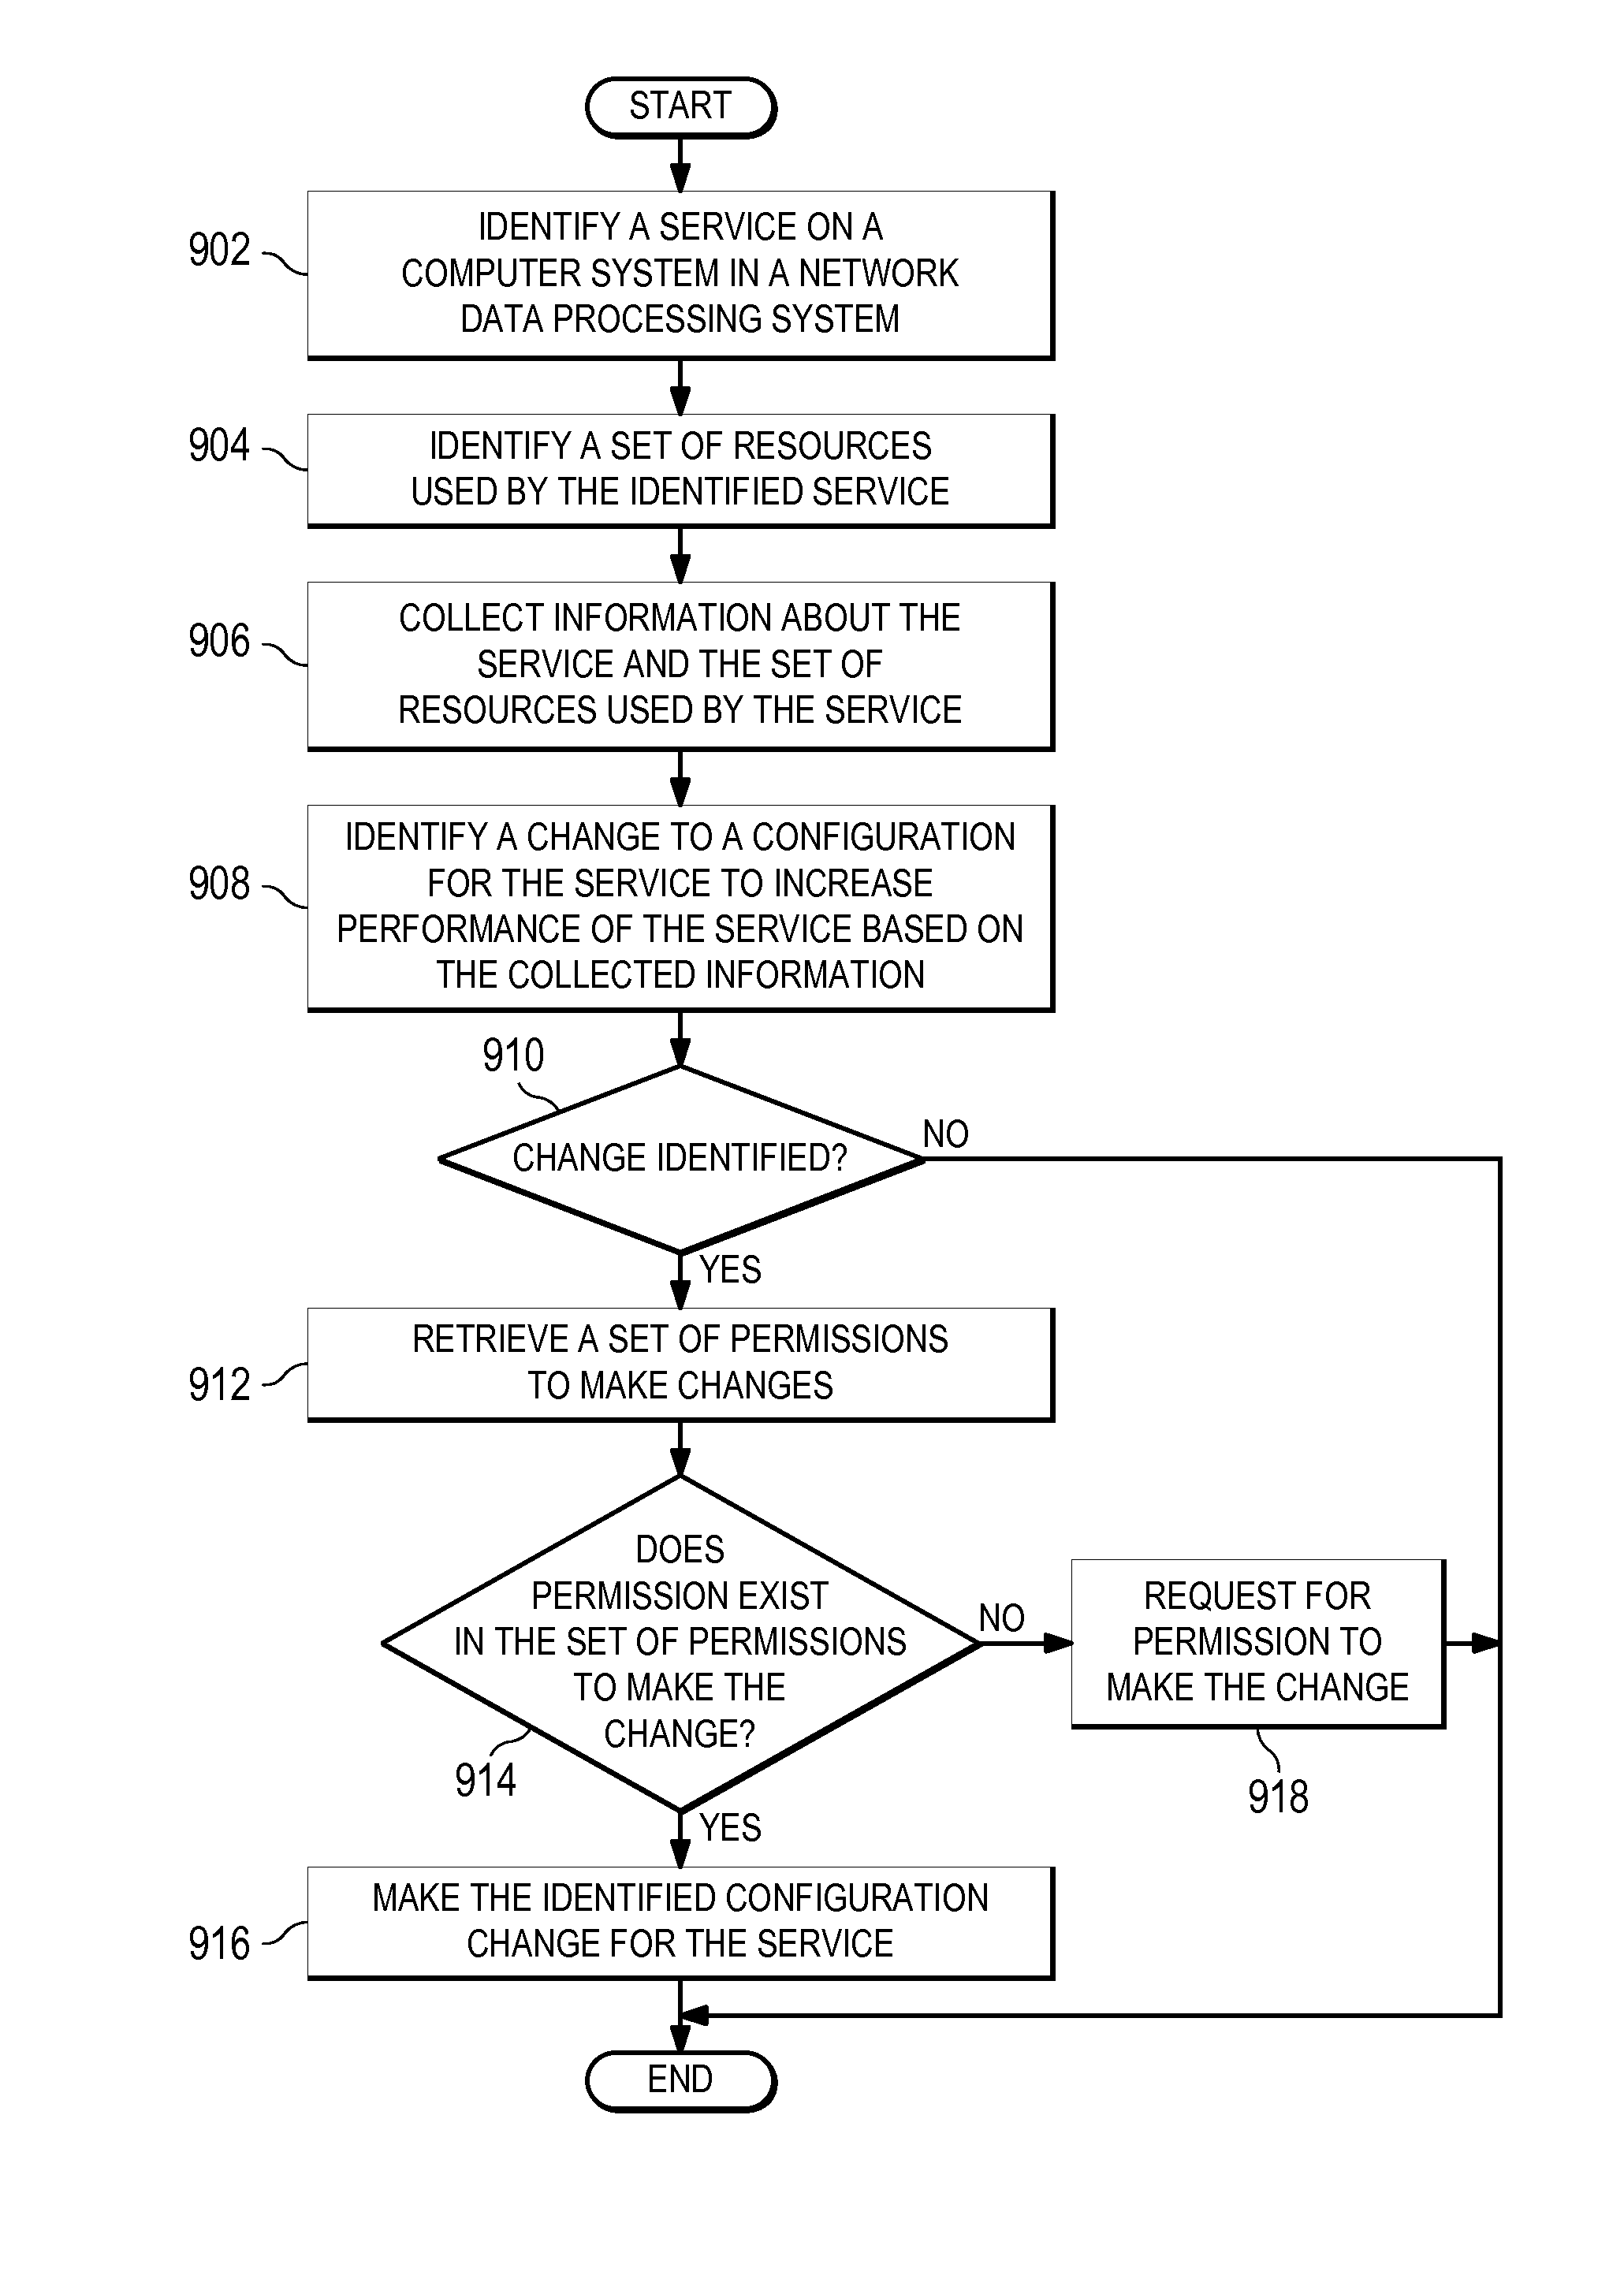 Resource configuration for a network data processing system